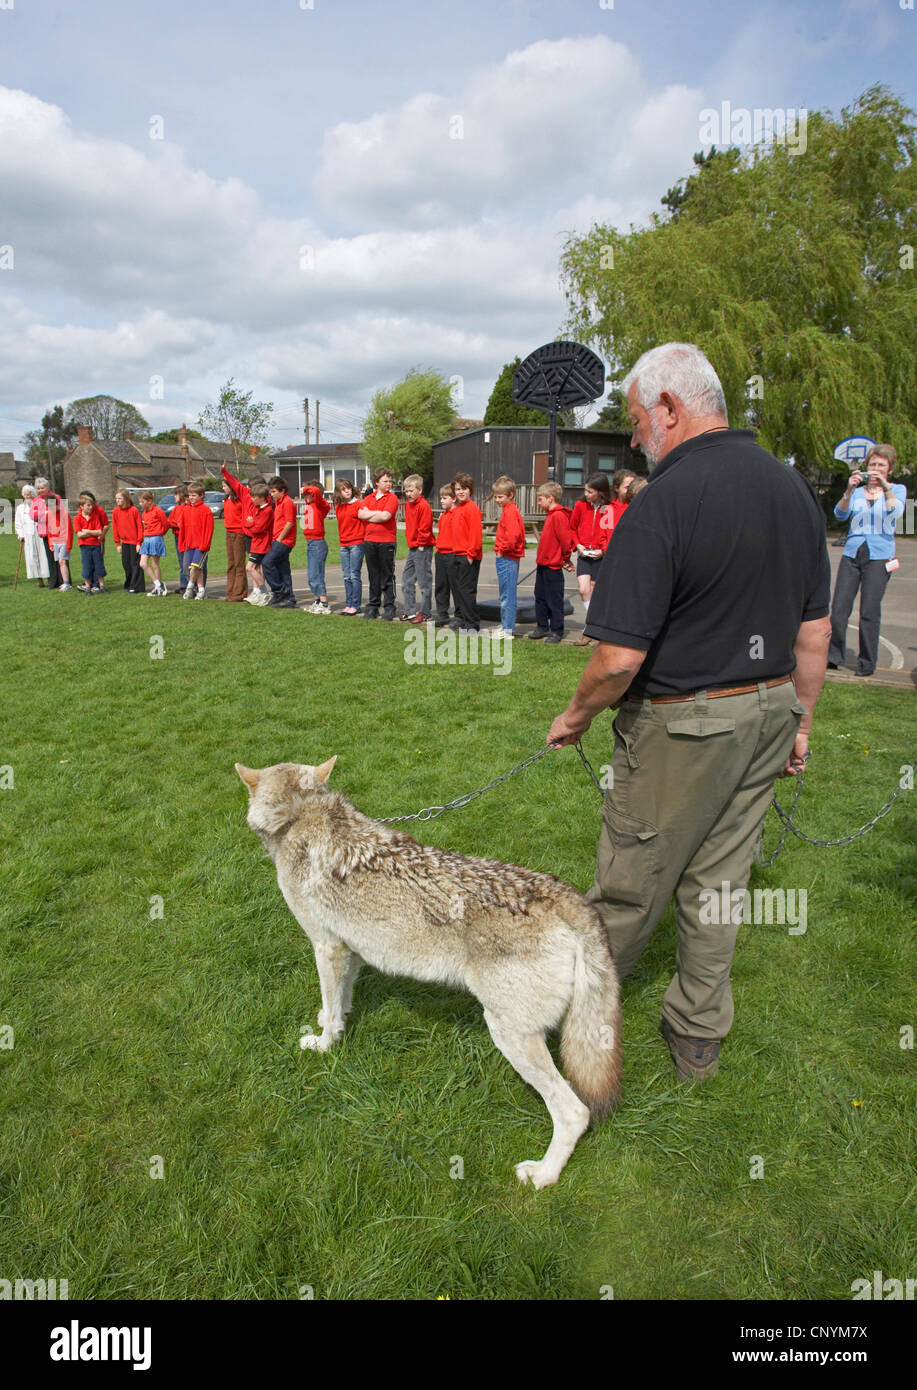 European gray wolf (Canis lupus lupus), visit of two tame animals from the UK Wolf Conservation Trust, Oxon, at a basic school, United Kingdom, England Stock Photo